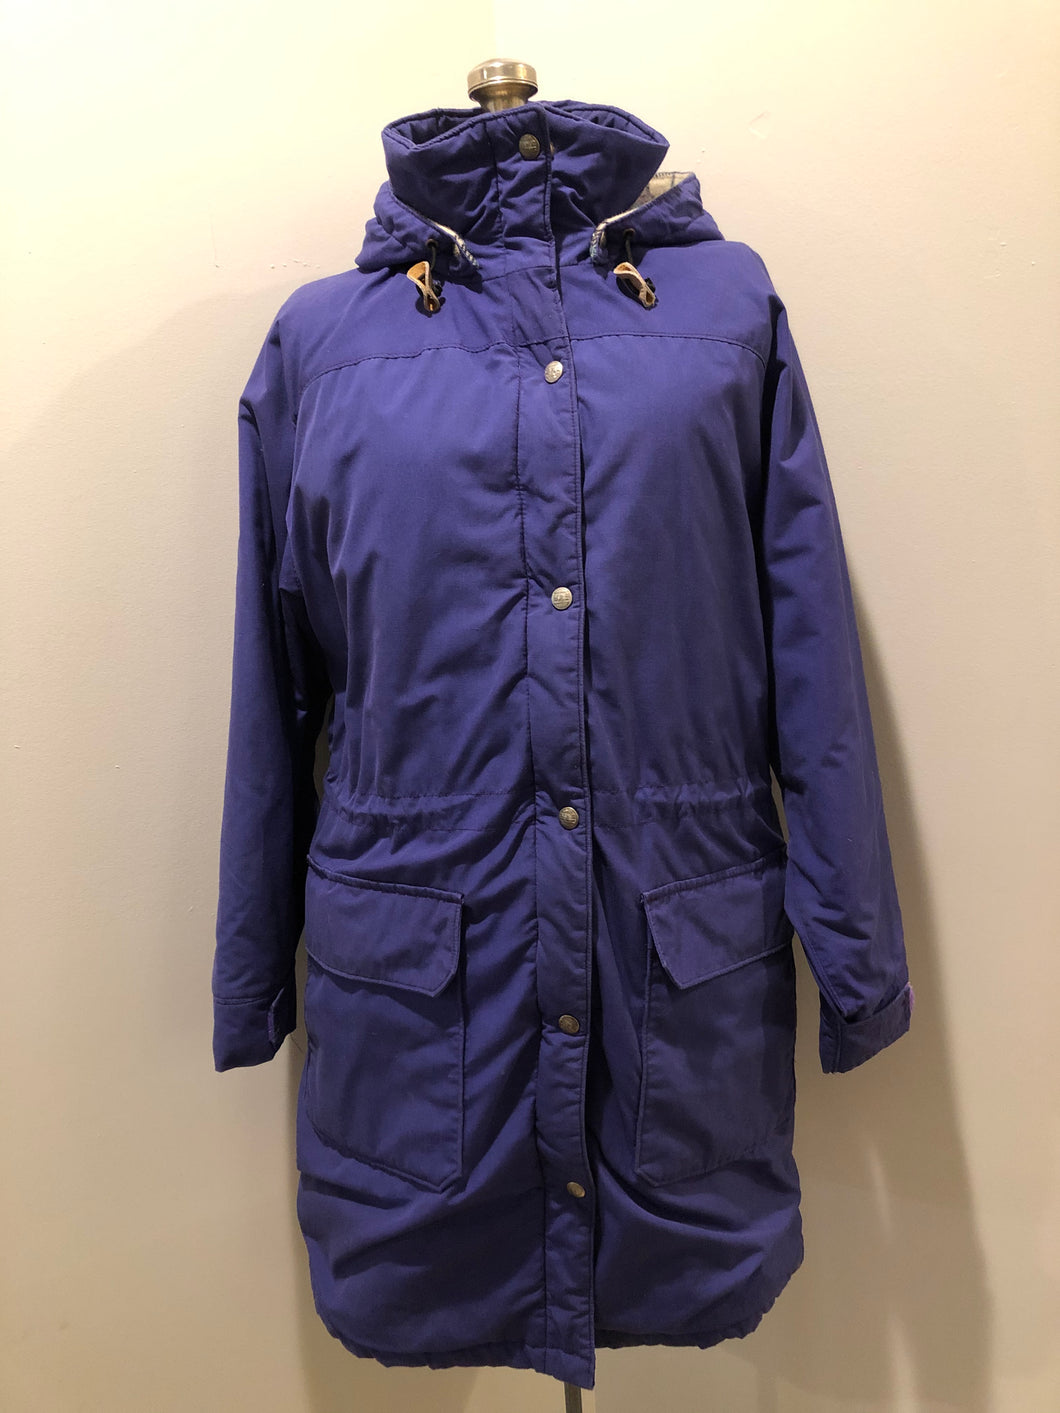 Kingspier Vintage - LL Bean purple casual coat with plaid lining, snap and zip closures, flap pockets, drawstring at the waist and detachable hood. Size medium.
